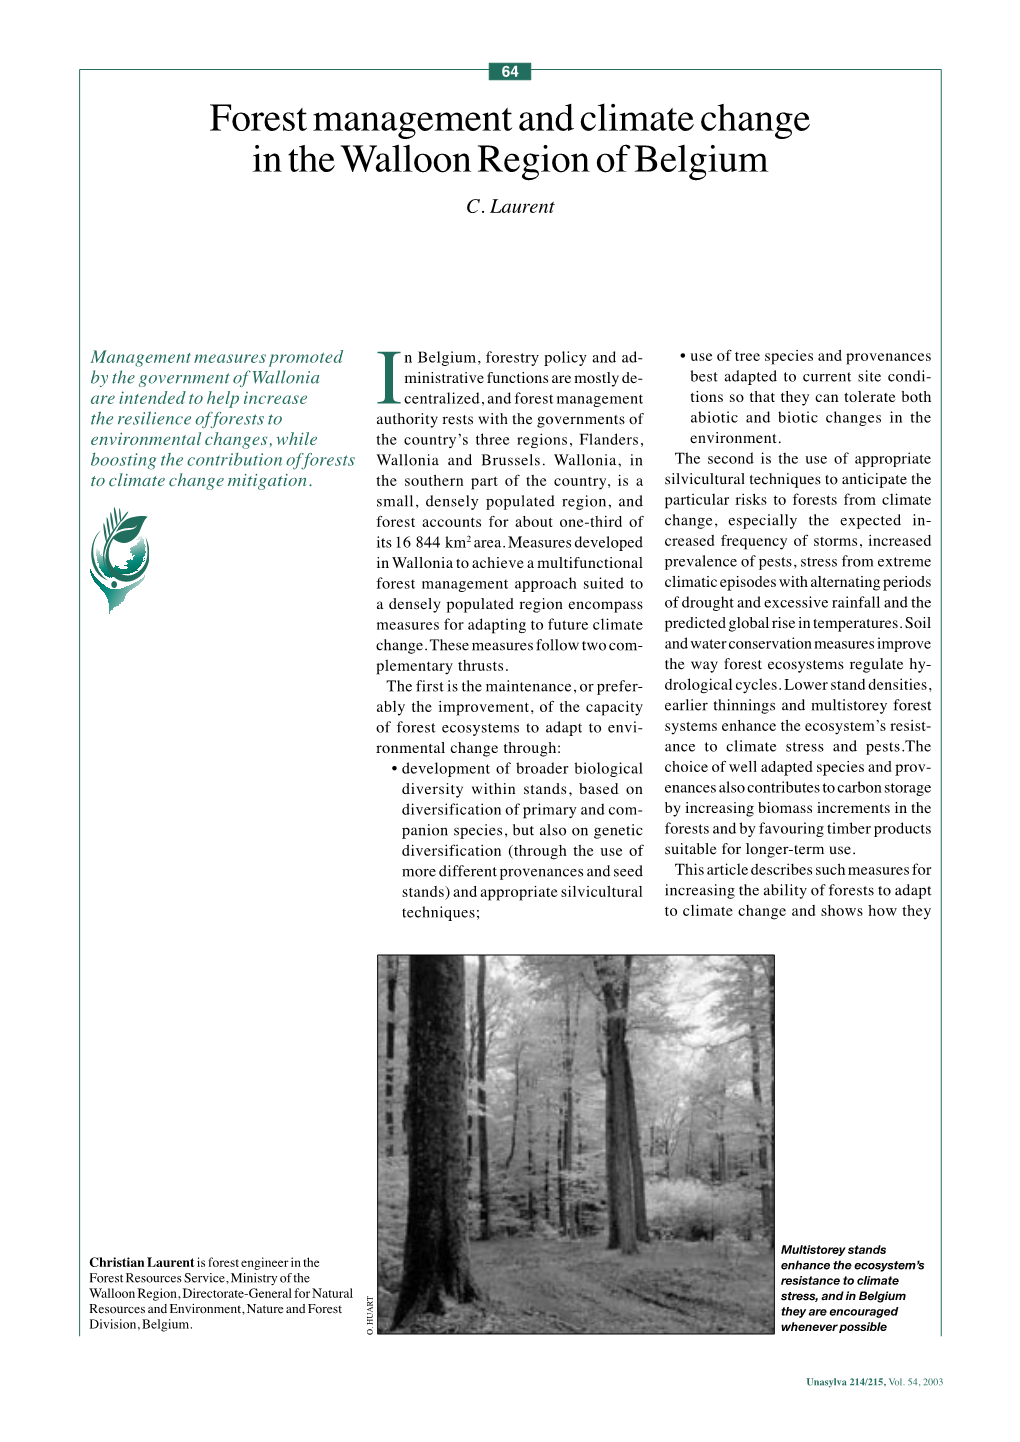 Forest Management and Climate Change in the Walloon Region of Belgium C